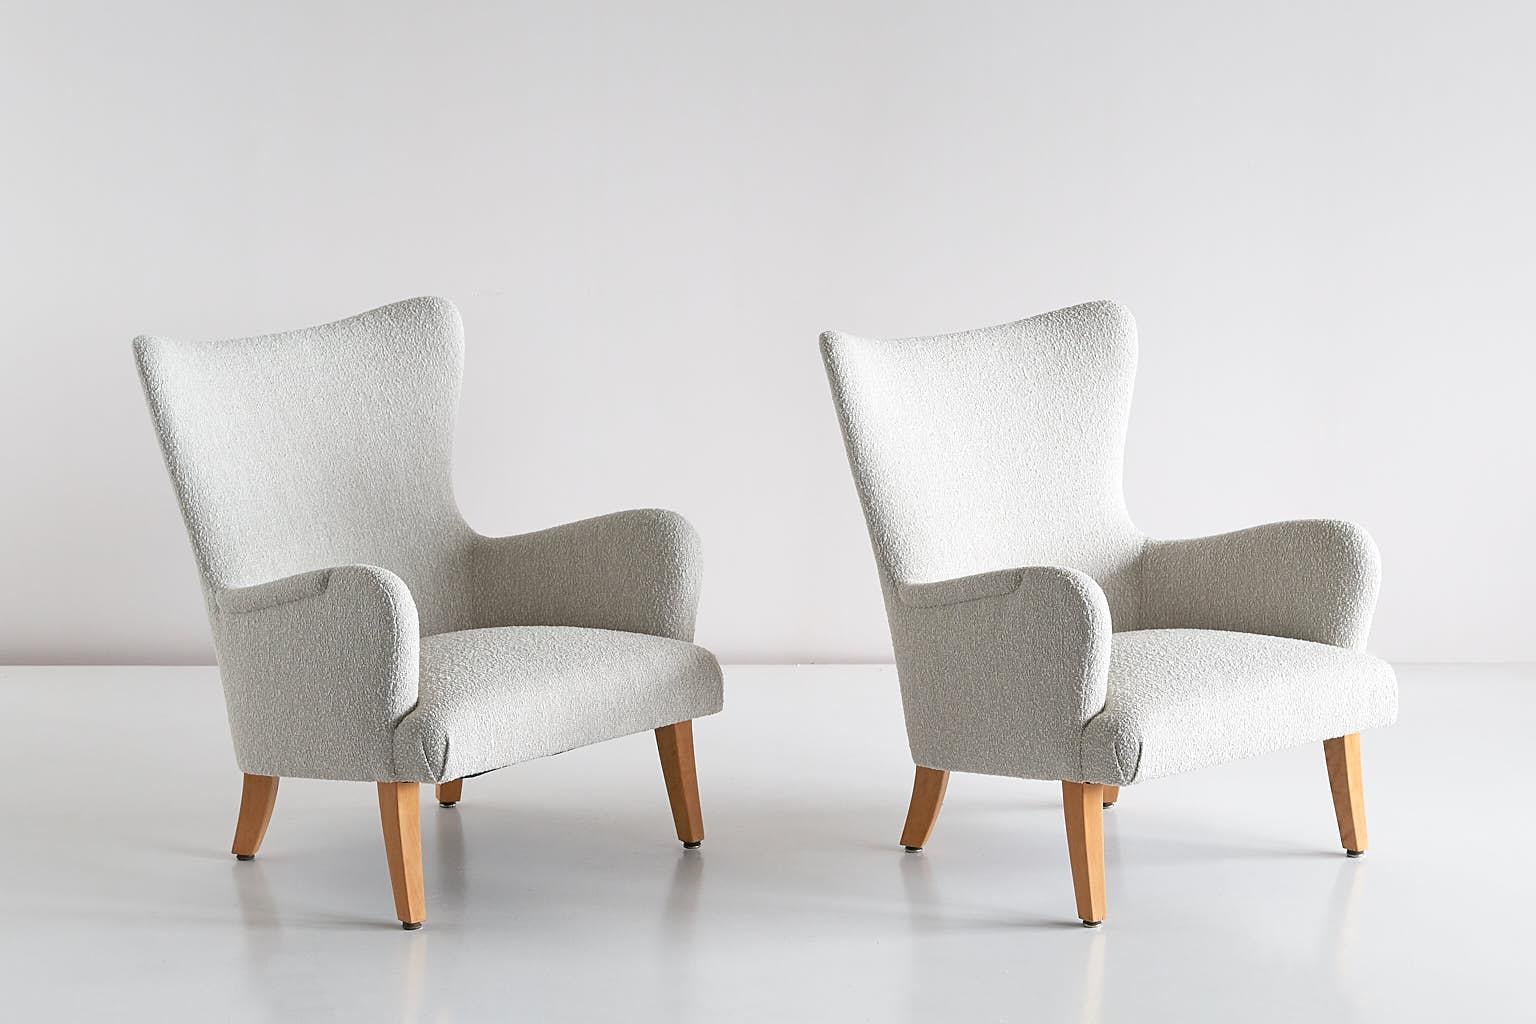 This rare pair of armchairs was designed by Rolf Engströmer for the Maria Husmodersskola in Stockholm, circa 1946. The round lines, the slanted seat and the curved, tapered sycamore legs give the design a gracious appearance.

The chairs have been